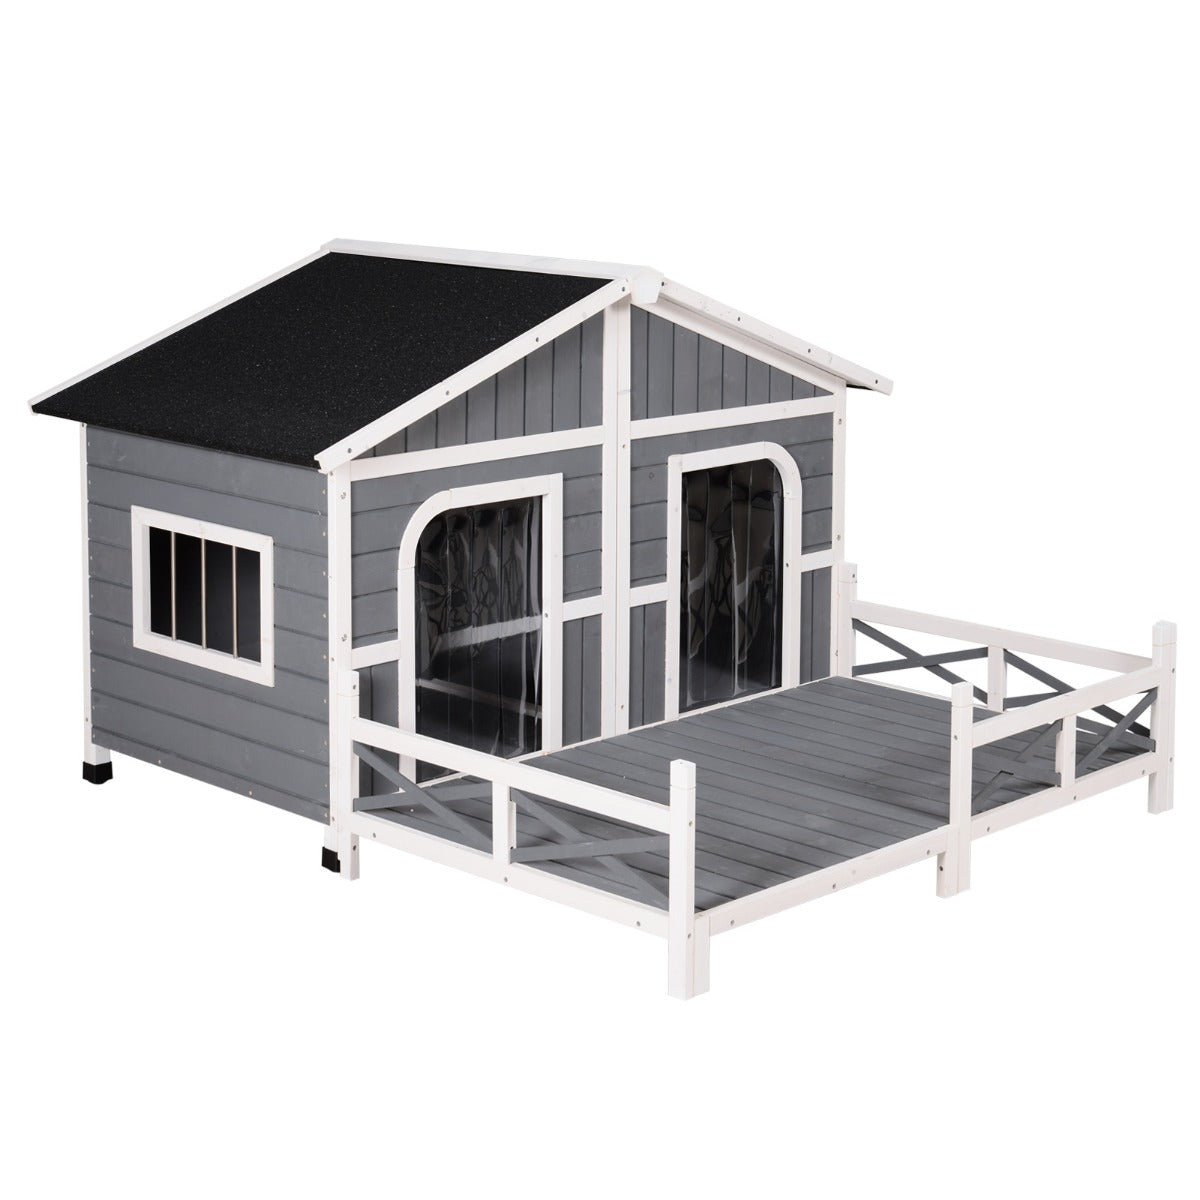 Festnight 59"X64"X39" Outdoor Dog House Weatherproof Rustic Log Cabin Style Wooden Raised Large Pet Shelter Nap W/ Porch